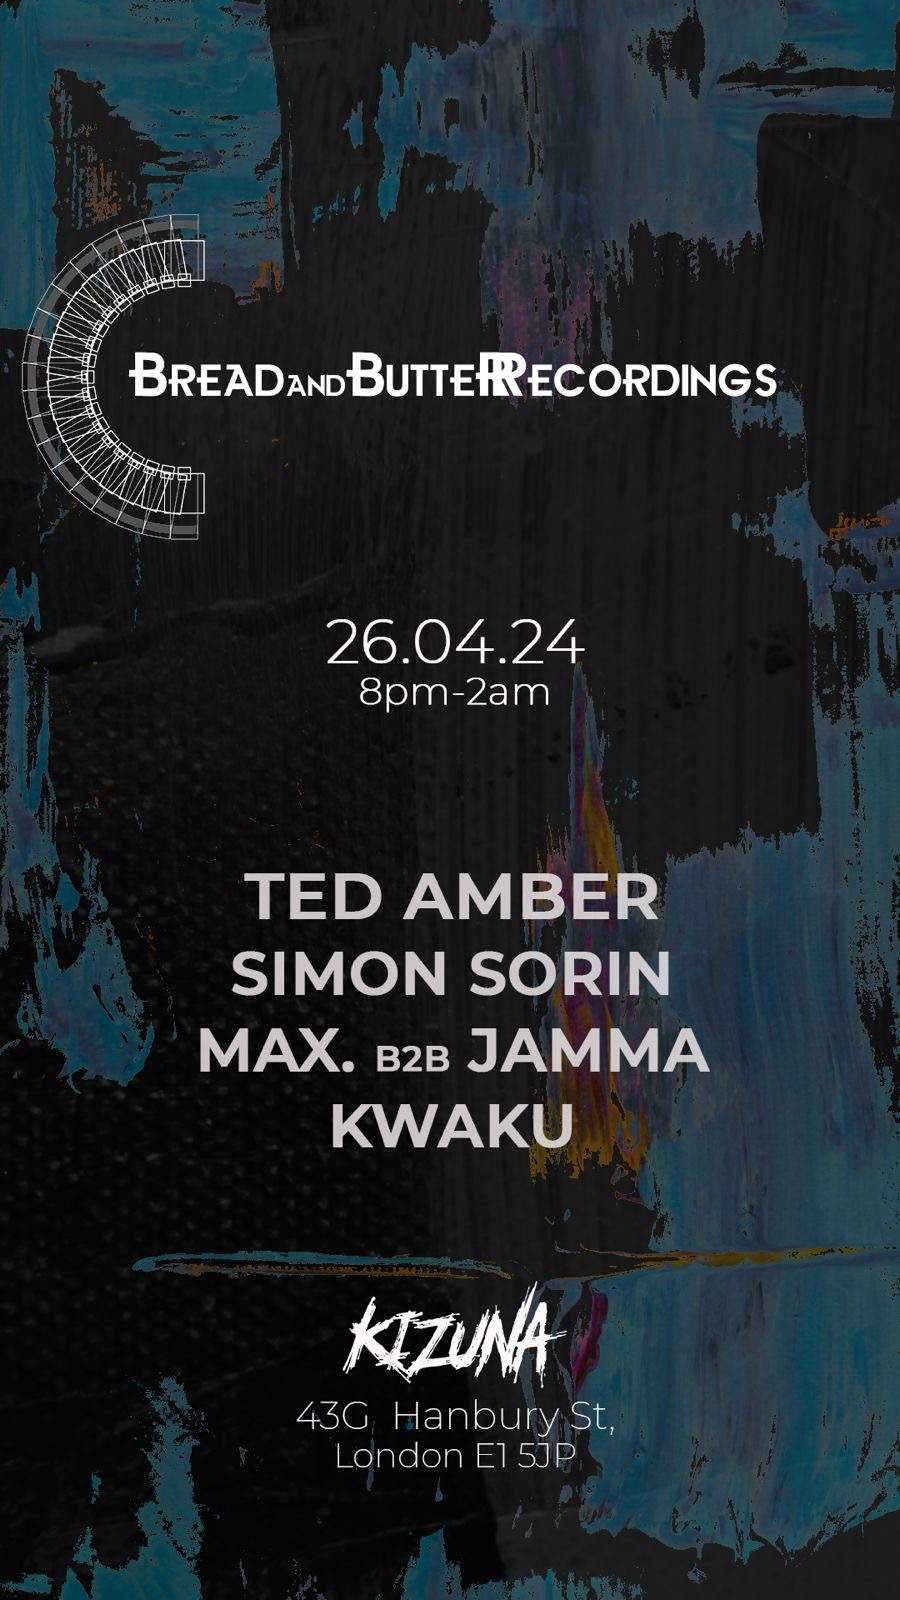 Bread and Butter Recordings Label Party - Verso du flyer